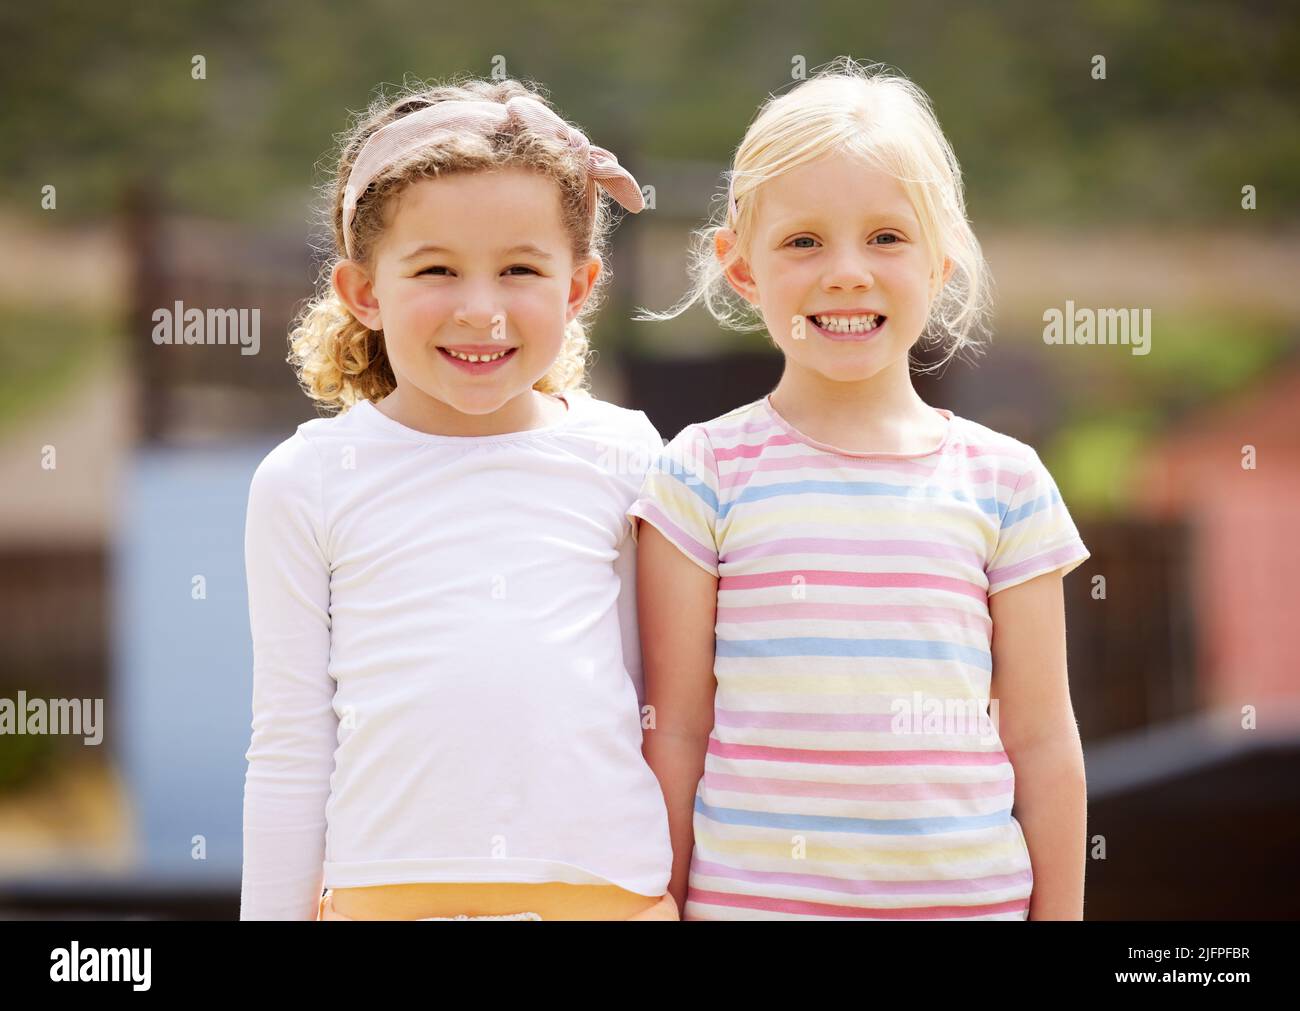 Image of Two girls standing funny poses - Austockphoto